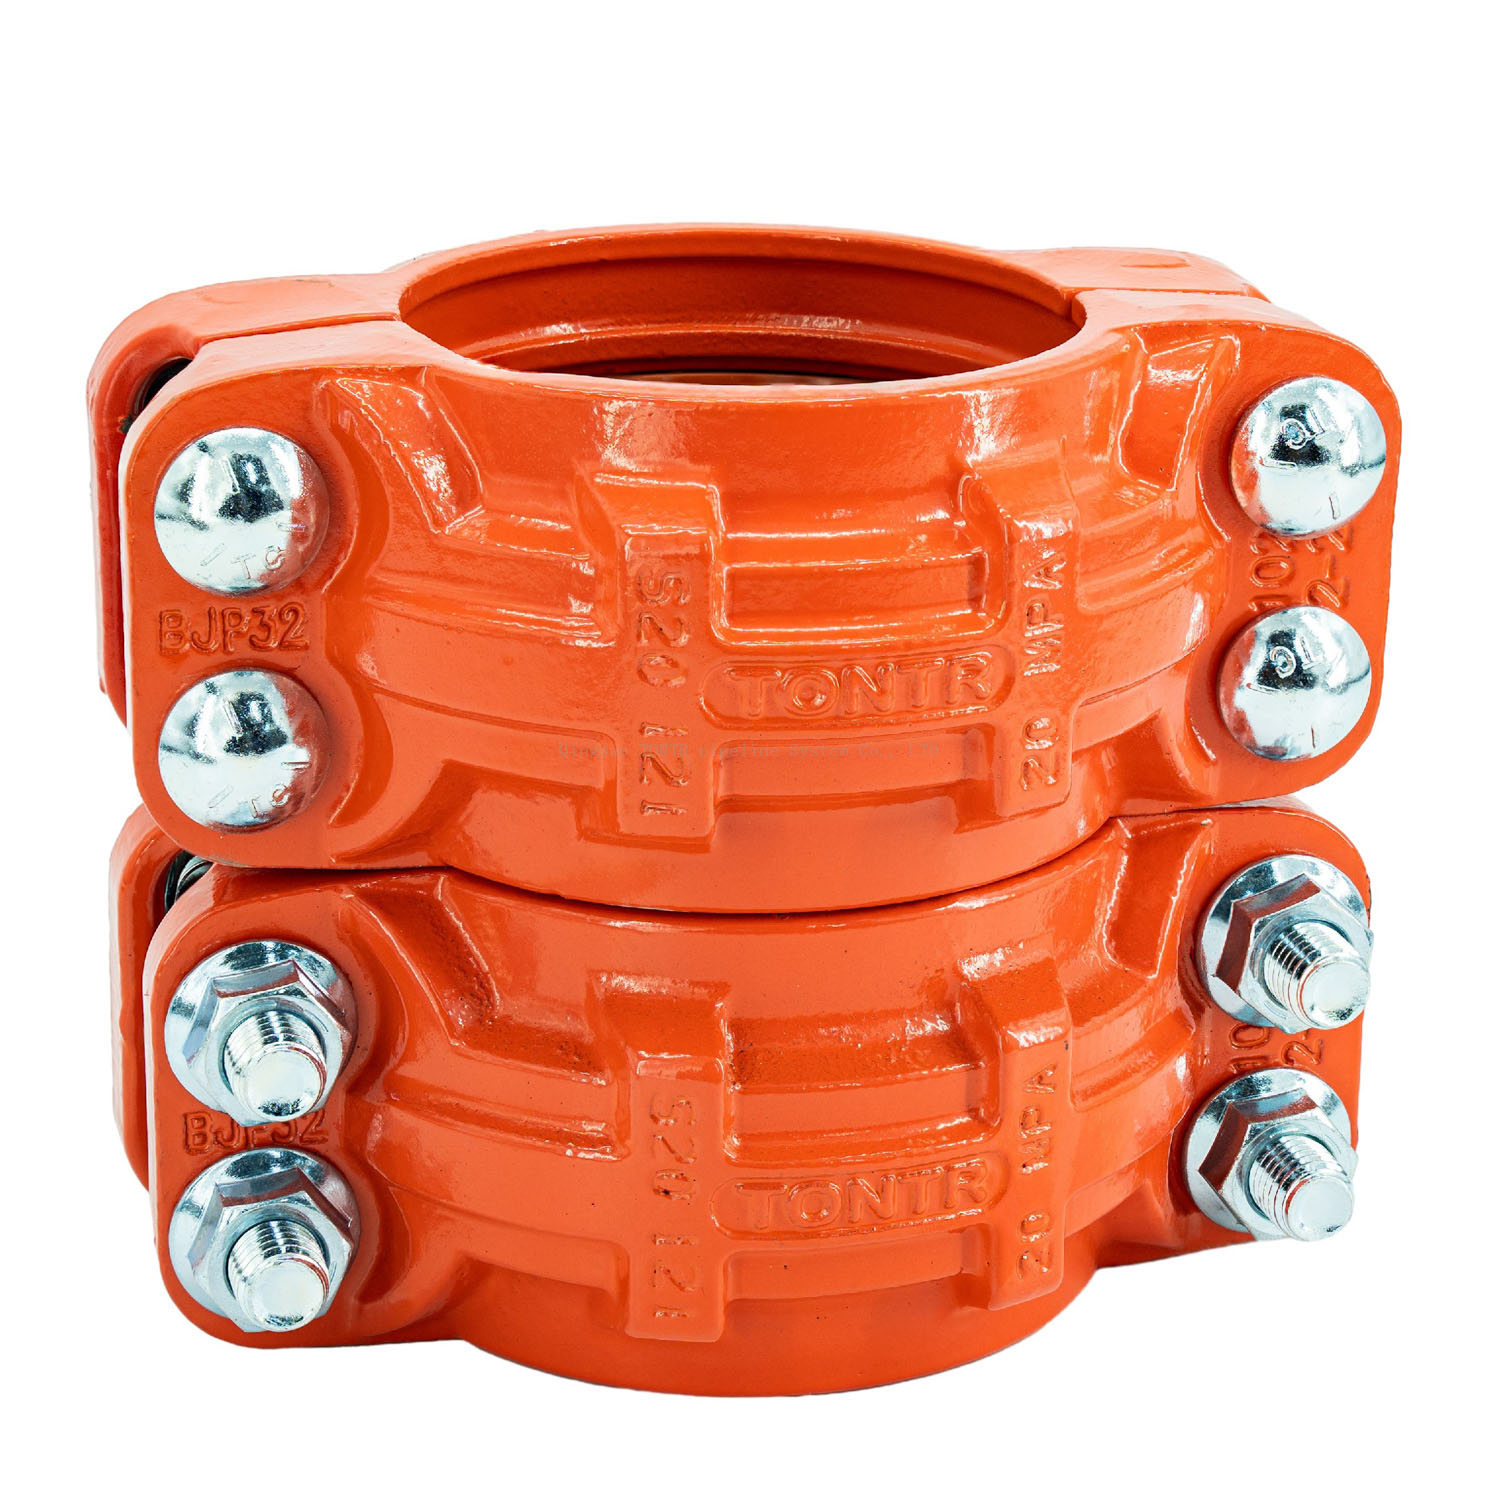 Red ductile iron pipe coupling